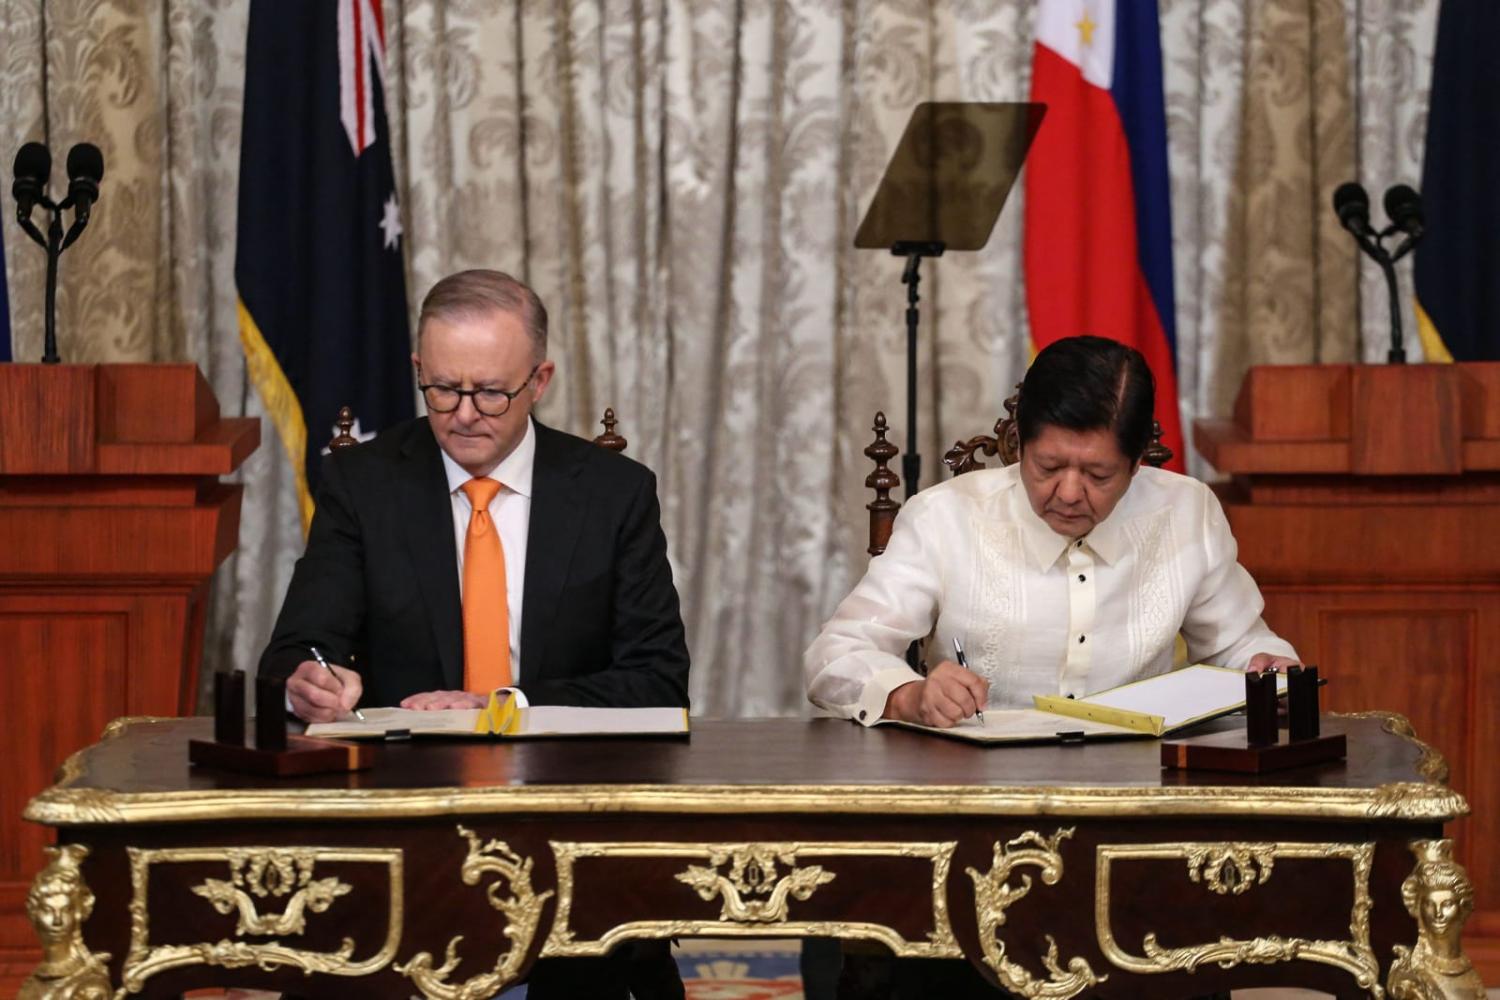 Australia's Prime Minister Anthony Albanese, left, and Philippines' President Ferdinand Marcos Jr. sign a Memorandum of Understanding at the Malacanang Palace in Manila in September this year (Earvin Perias via AFP/Getty Images) 